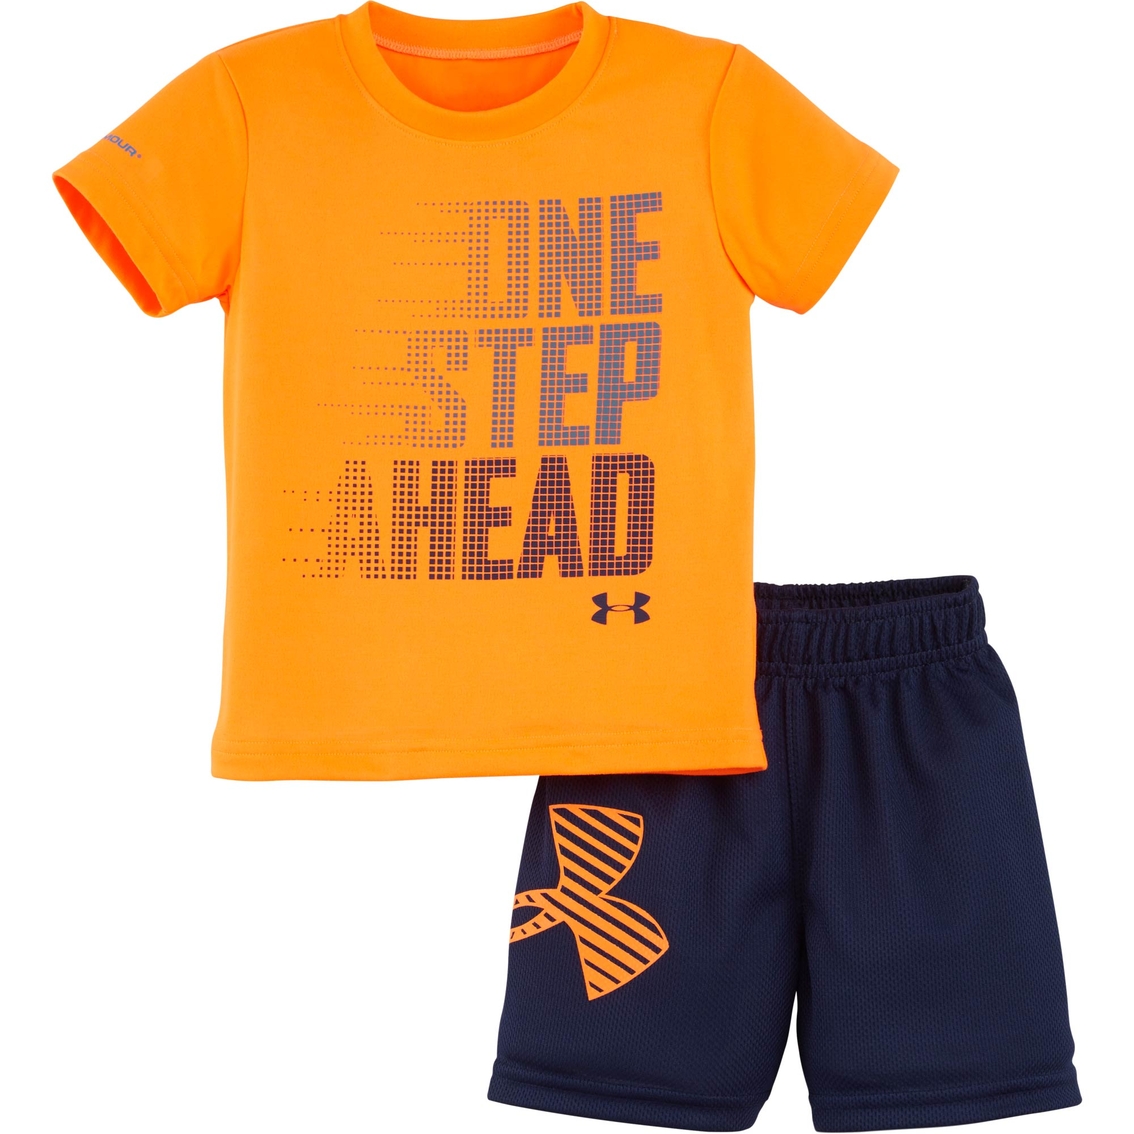 Under Armour Infant Boys One Step Ahead Set | Baby Boy 0-24 Months ...